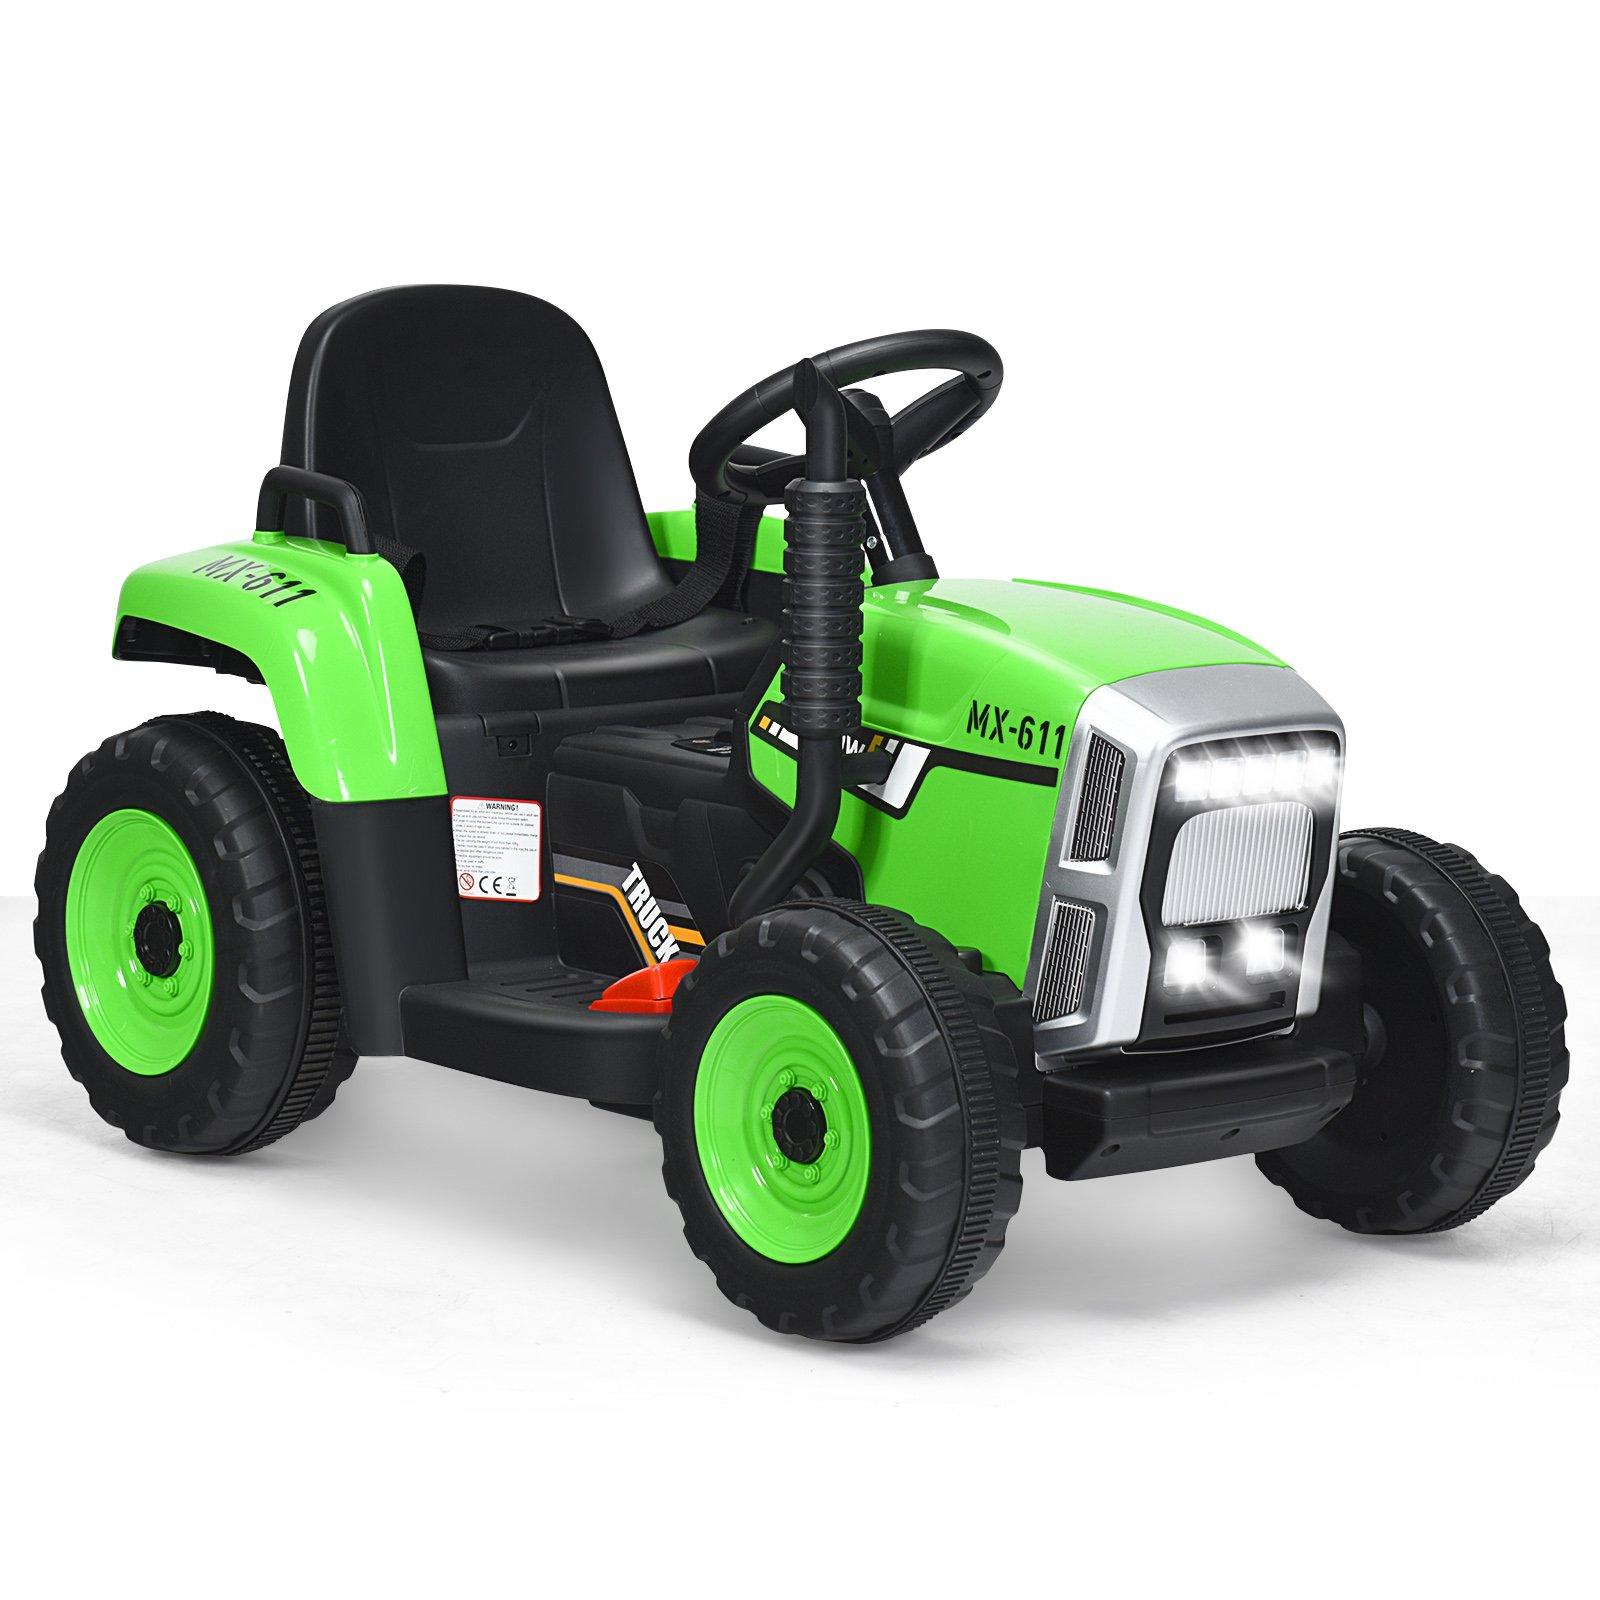 12V Kids Ride On Tractor W/ Trailer Electric 3-Gear-Shift Ground Loader Toy Car